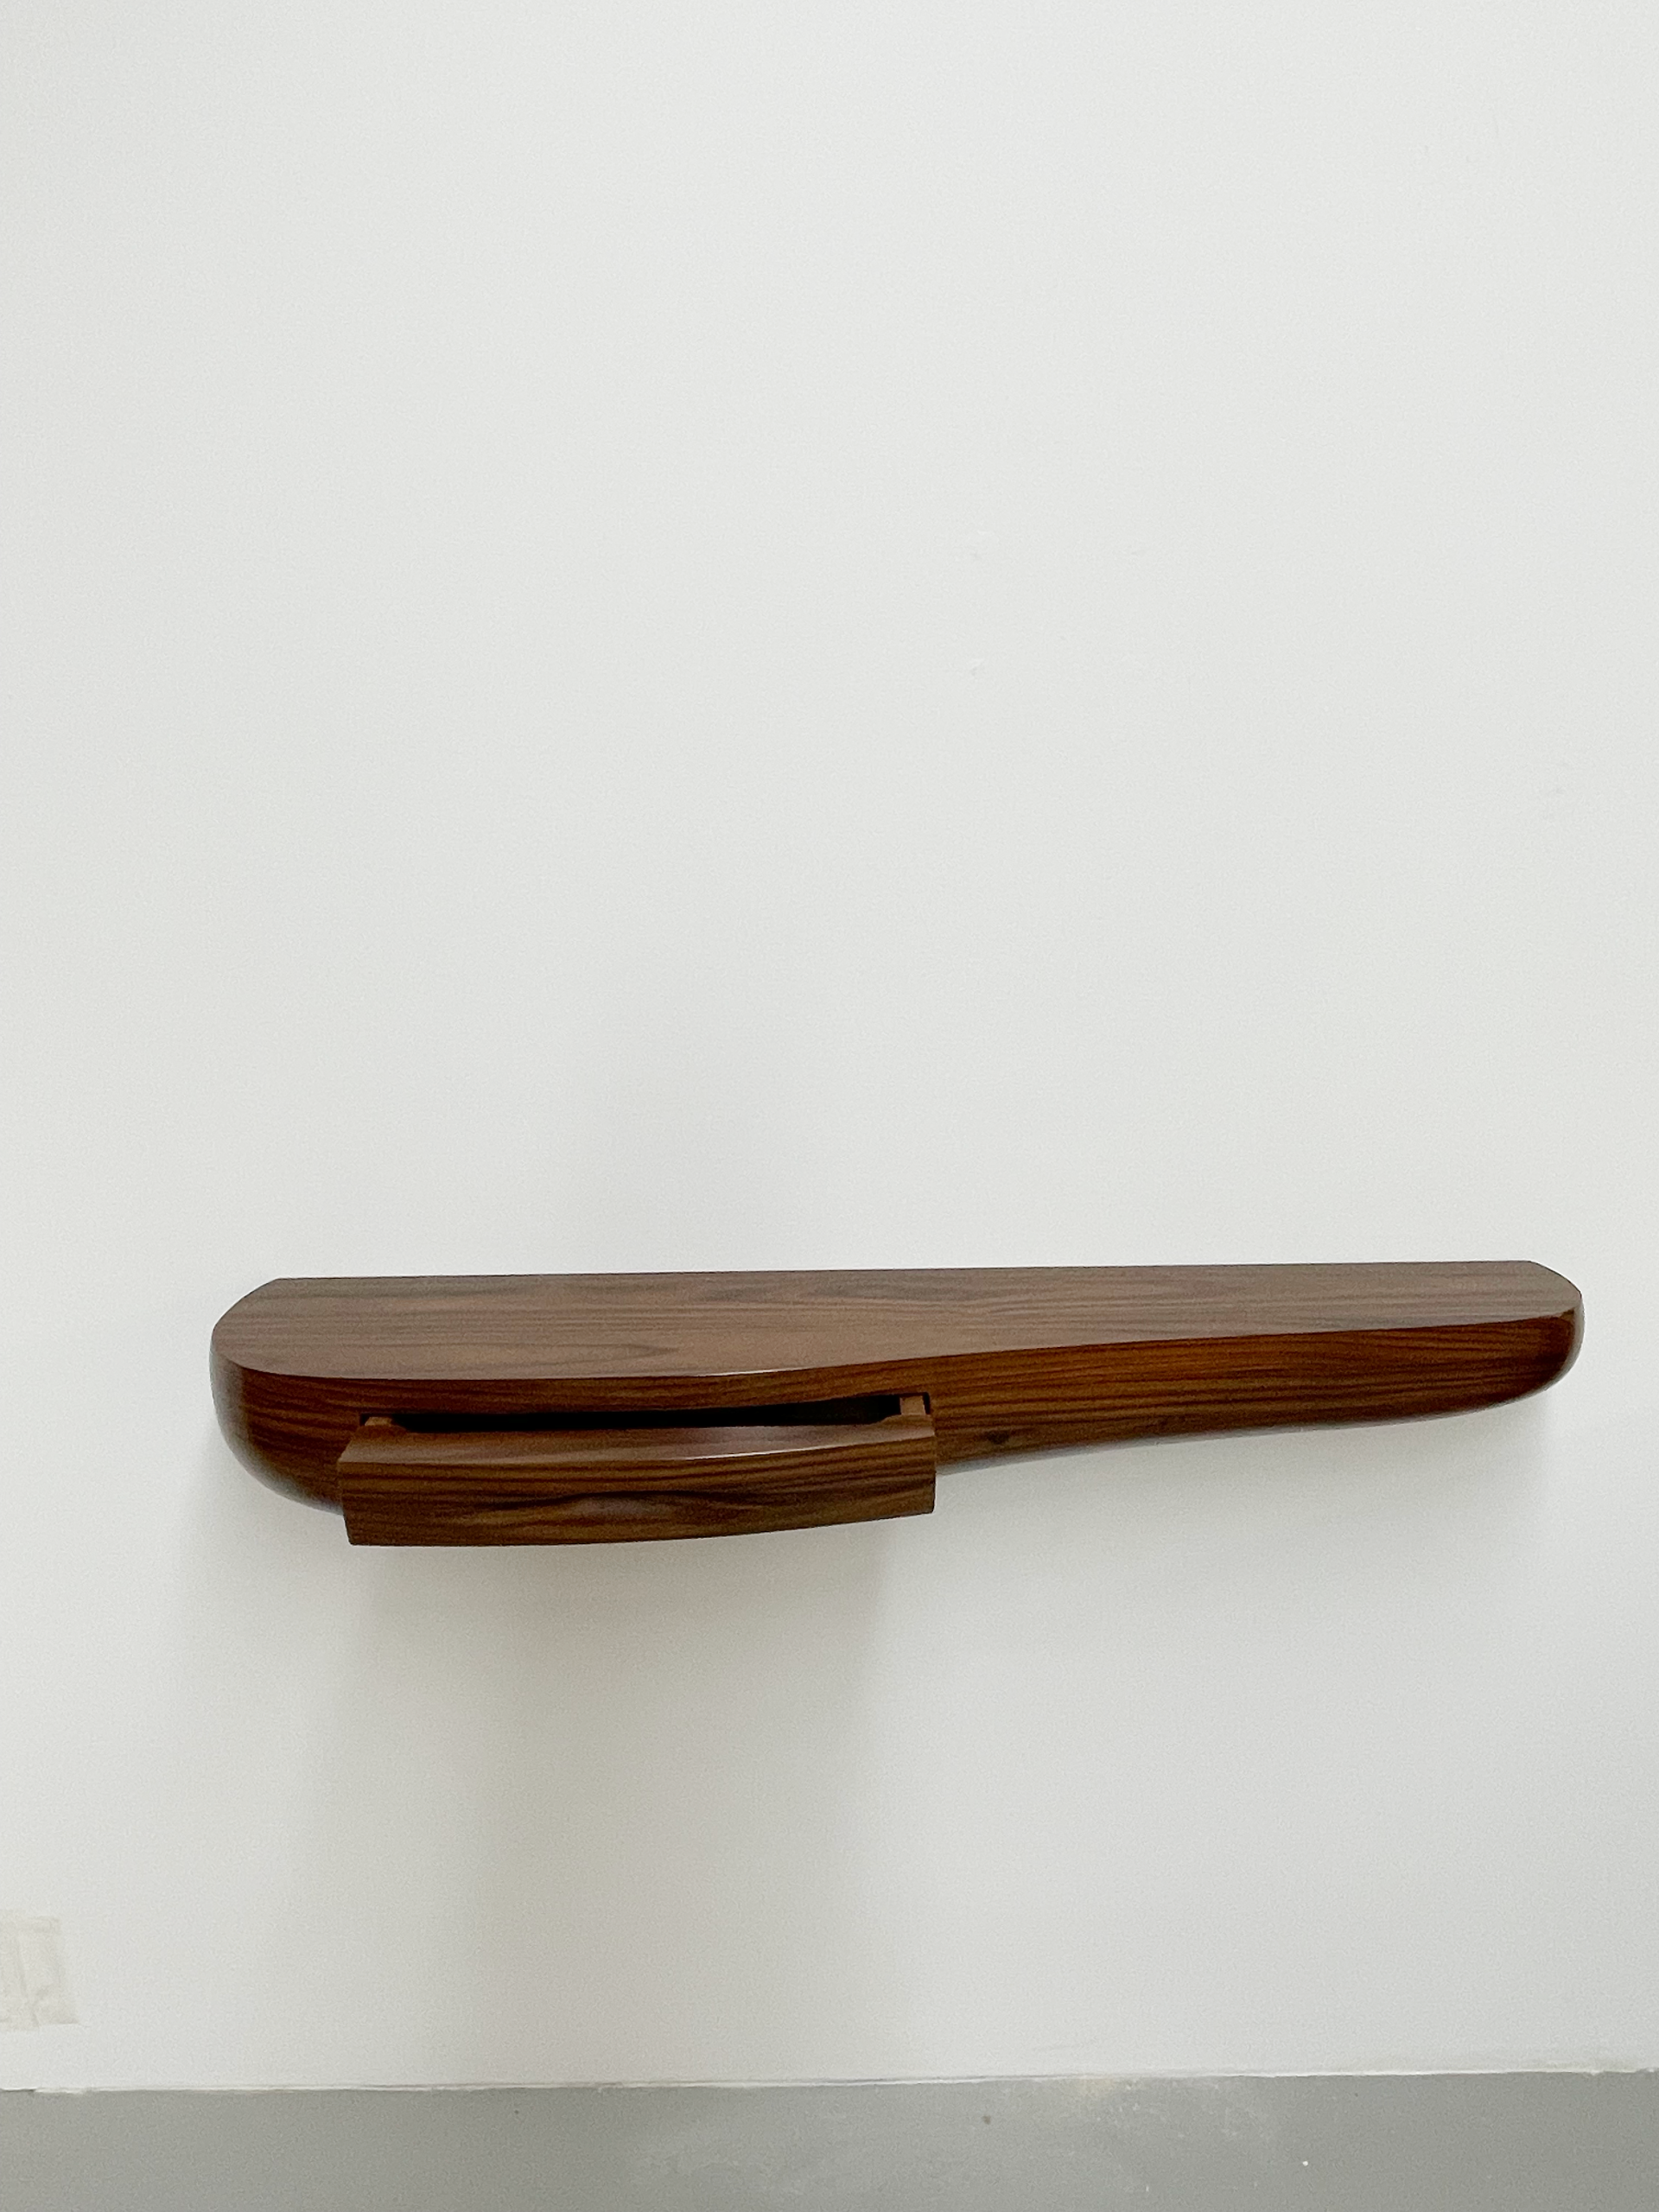 Console in Mahogany "Carnac" by Jacques Jarrige